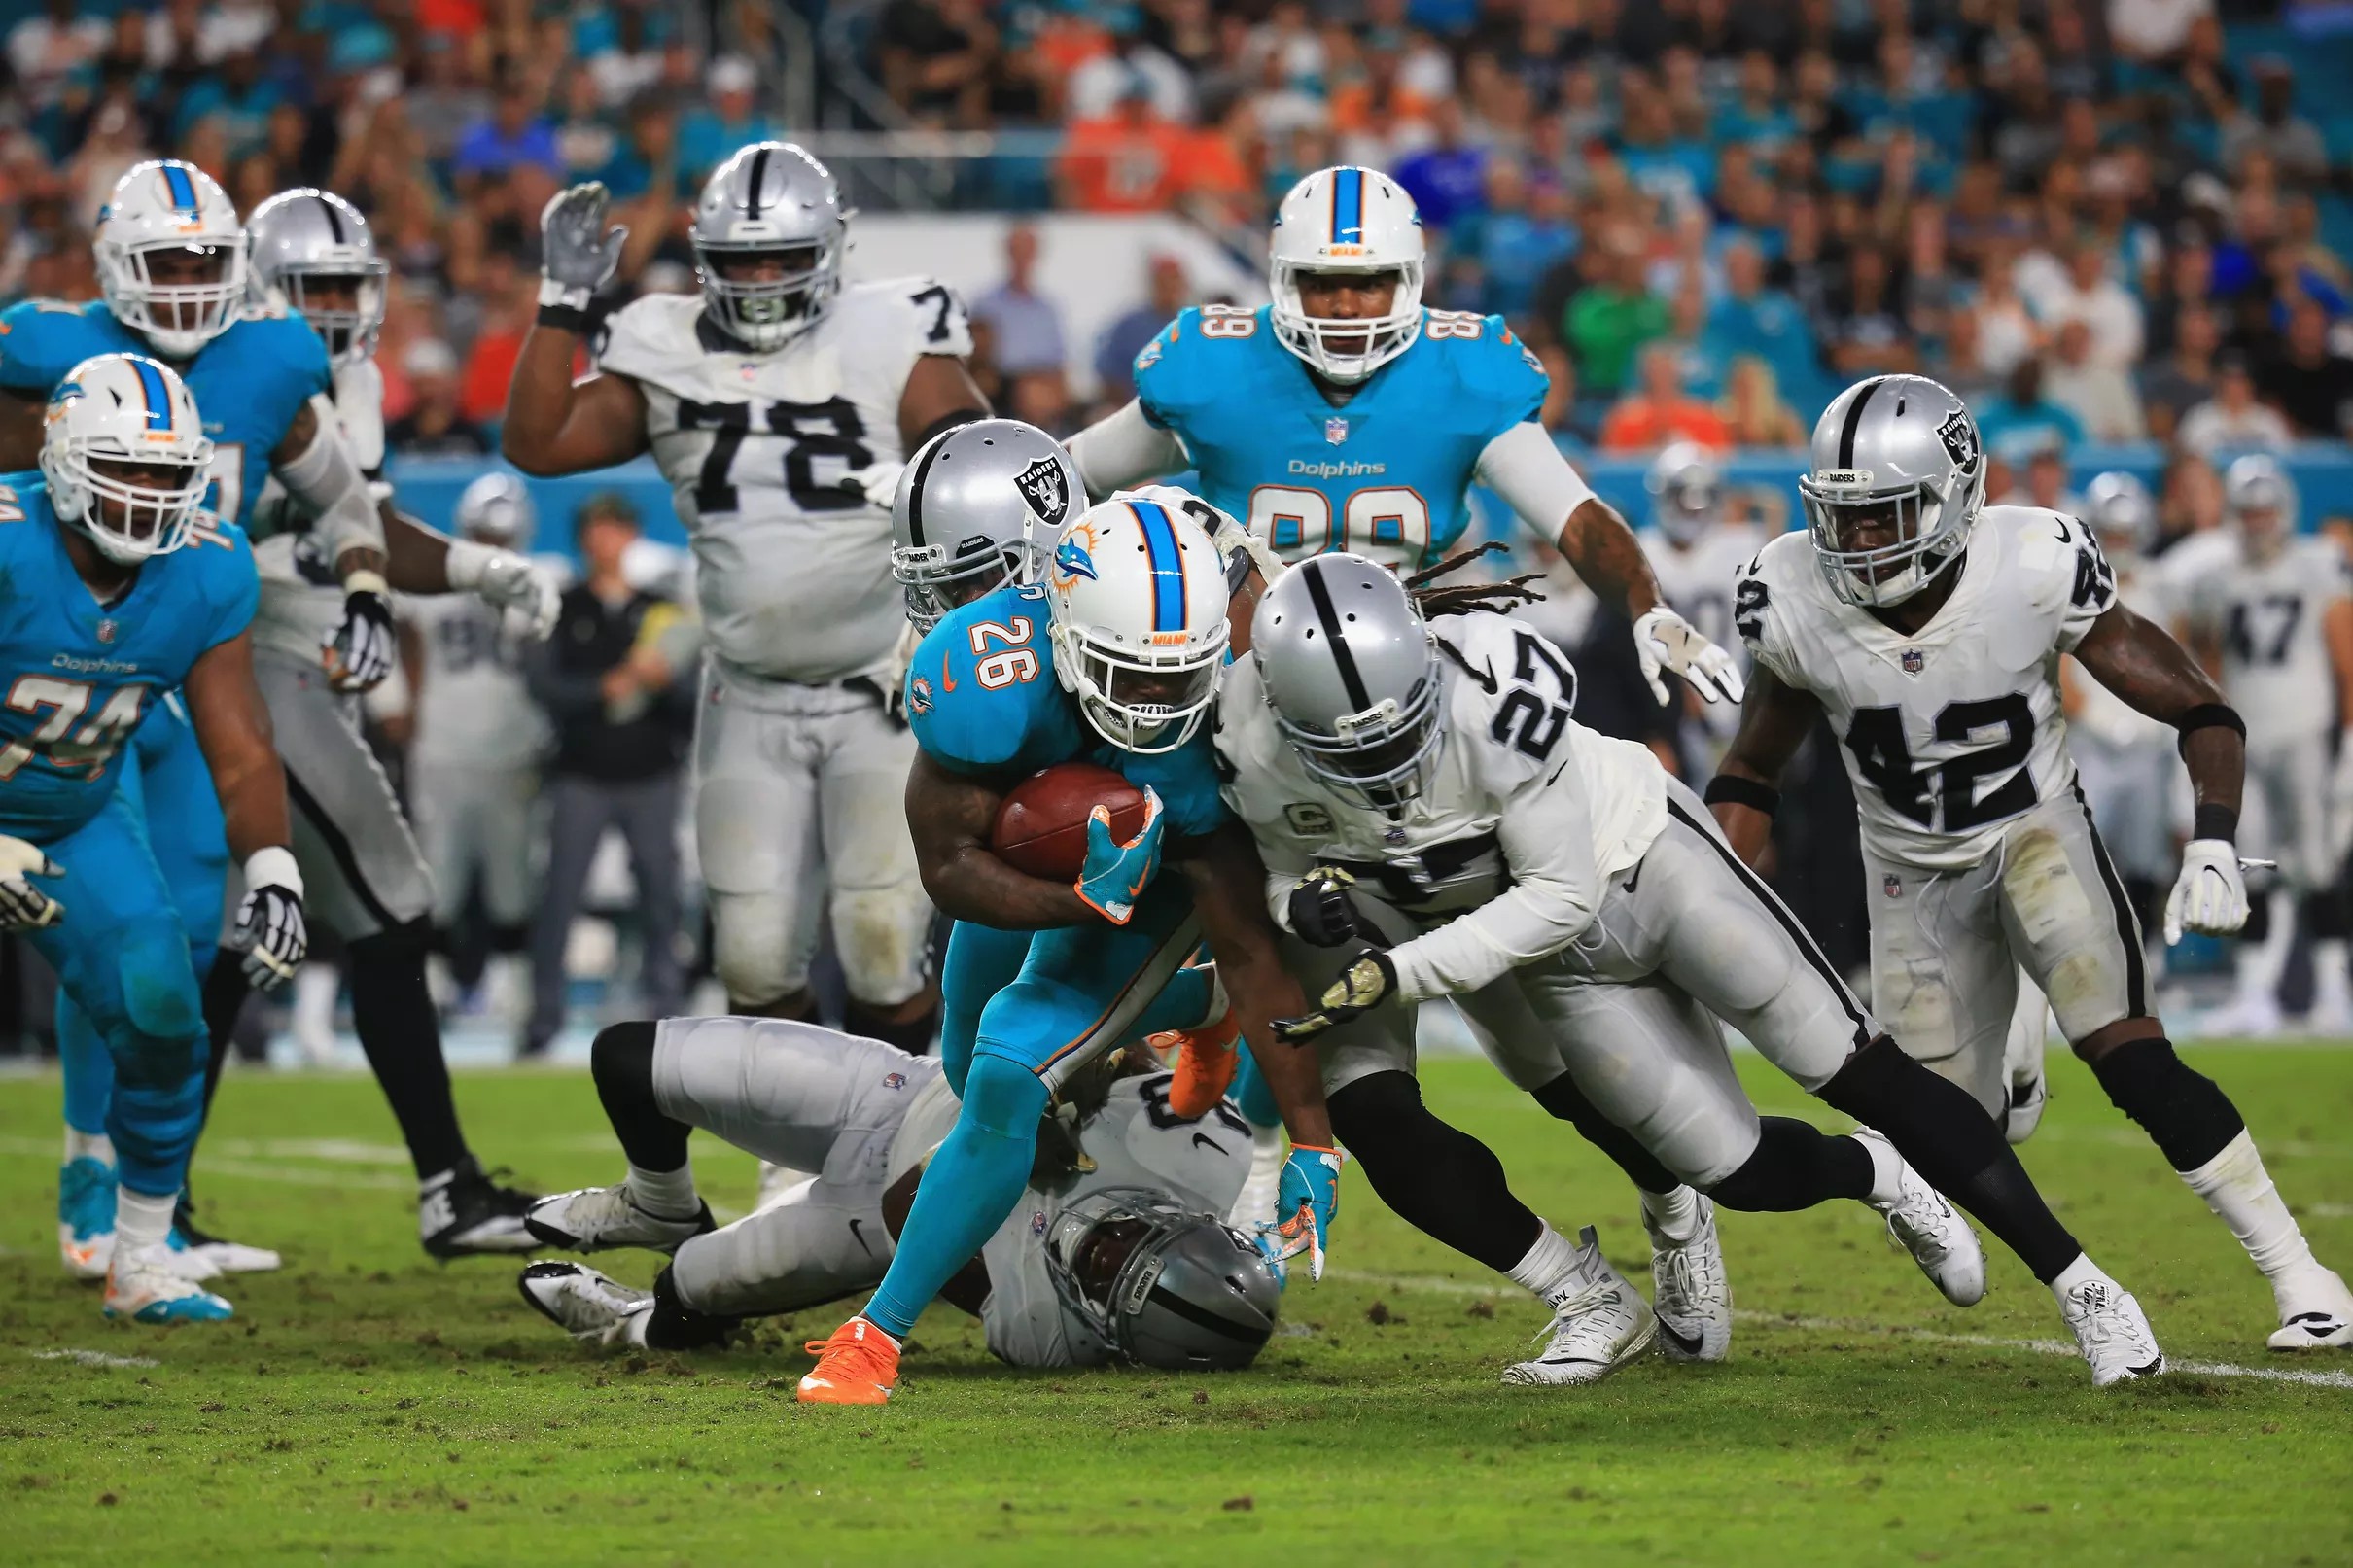 Raiders vs Dolphins preview Five good questions with Phinsider